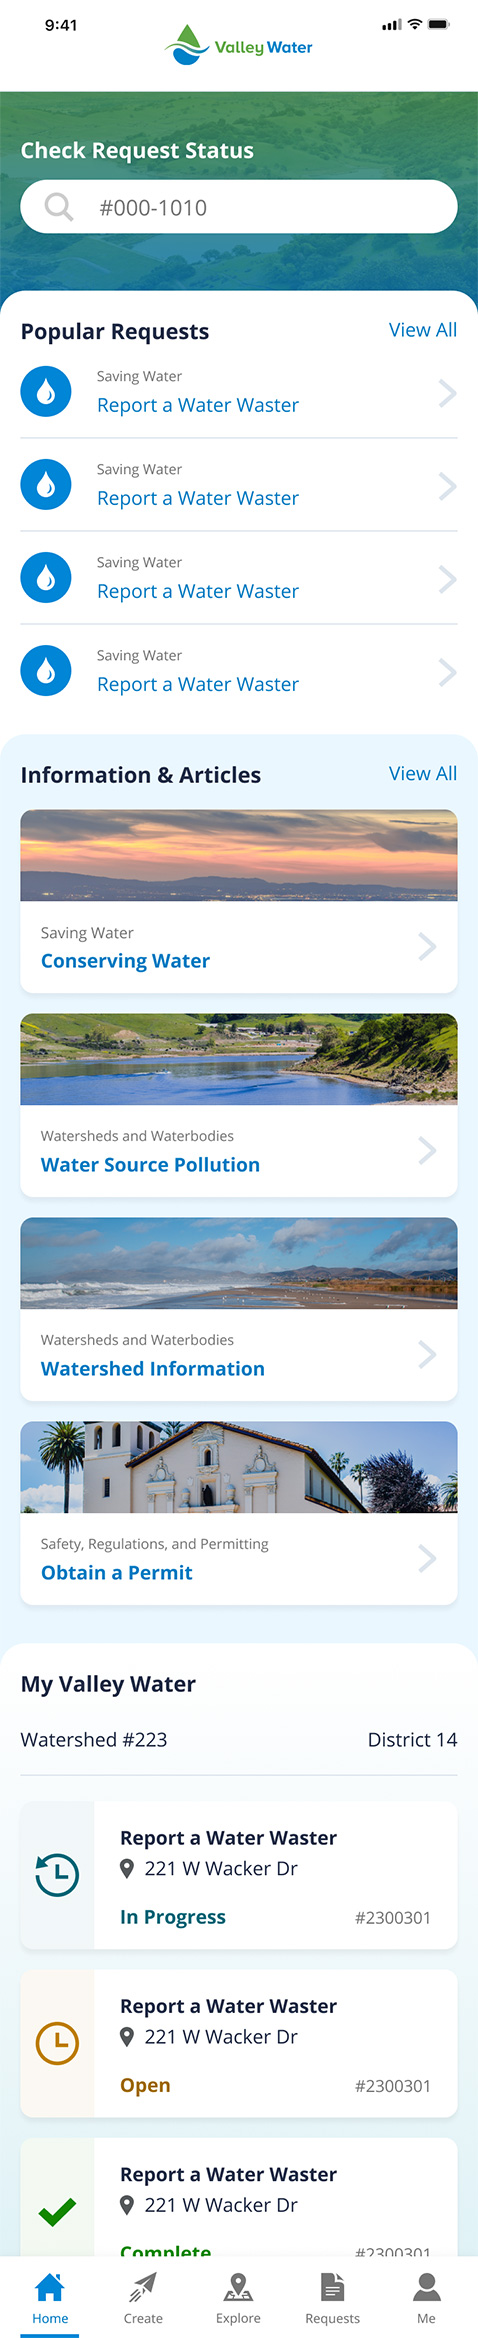 Screenshot of the Access Valley Water app home screen.